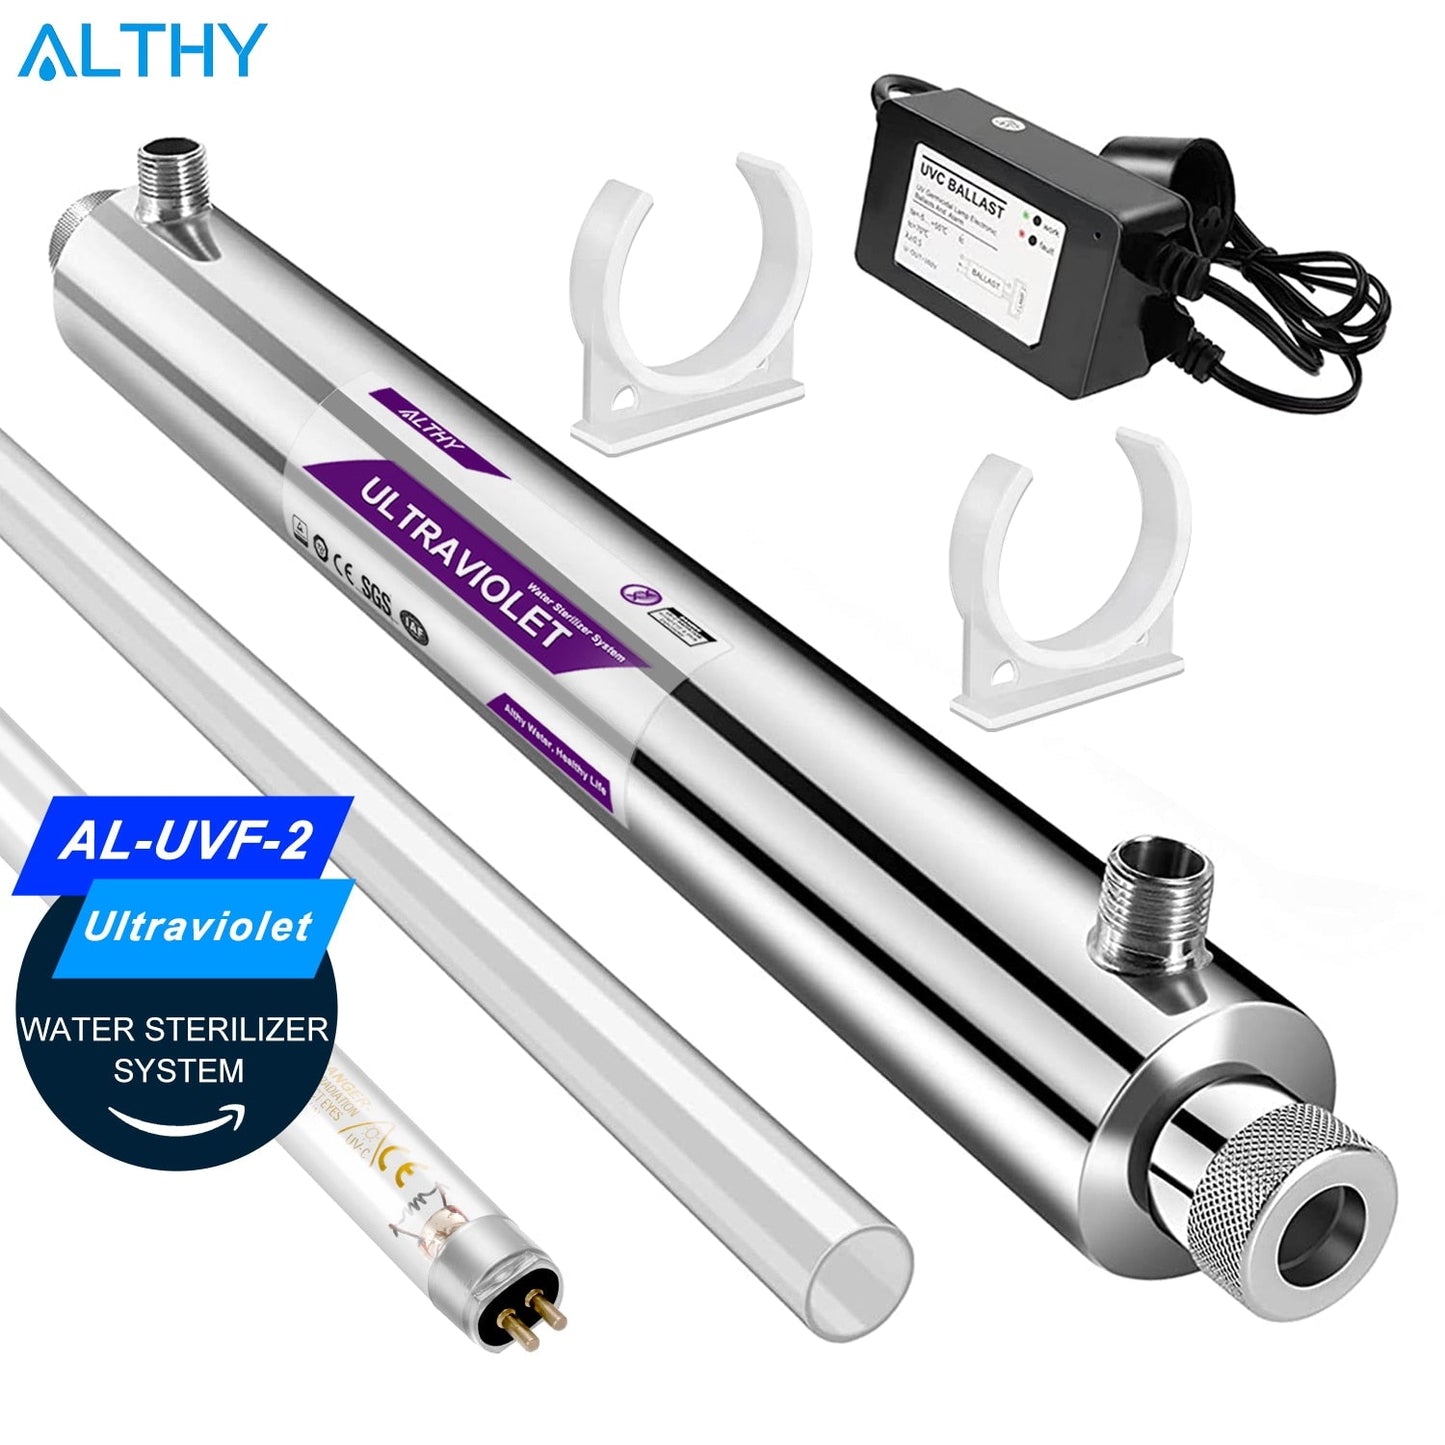 ALTHY Stainless Steel UV Water Sterilizer System Ultraviolet Tube Lamp Direct Drink Disinfection Filter Purifier 1GPM / 2GPM 2GPM-04EU220V-240V Hardware > Plumbing > Water Dispensing & Filtration 352.99 EZYSELLA SHOP